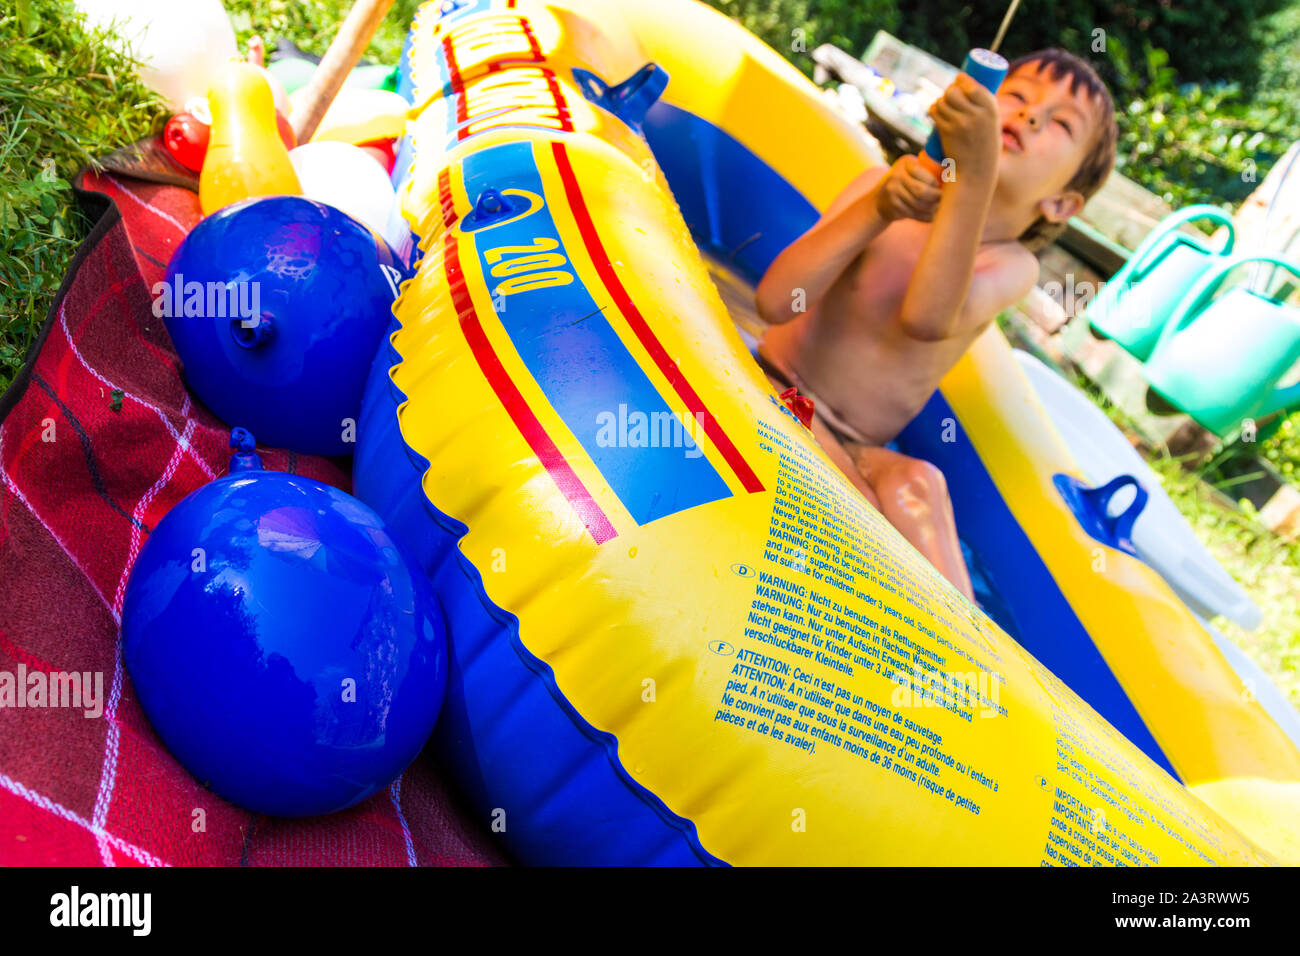 Boy child aged 5 playing with plastic toy water cannon and water bombs balloons while sitting in rubber pool in summer Stock Photo